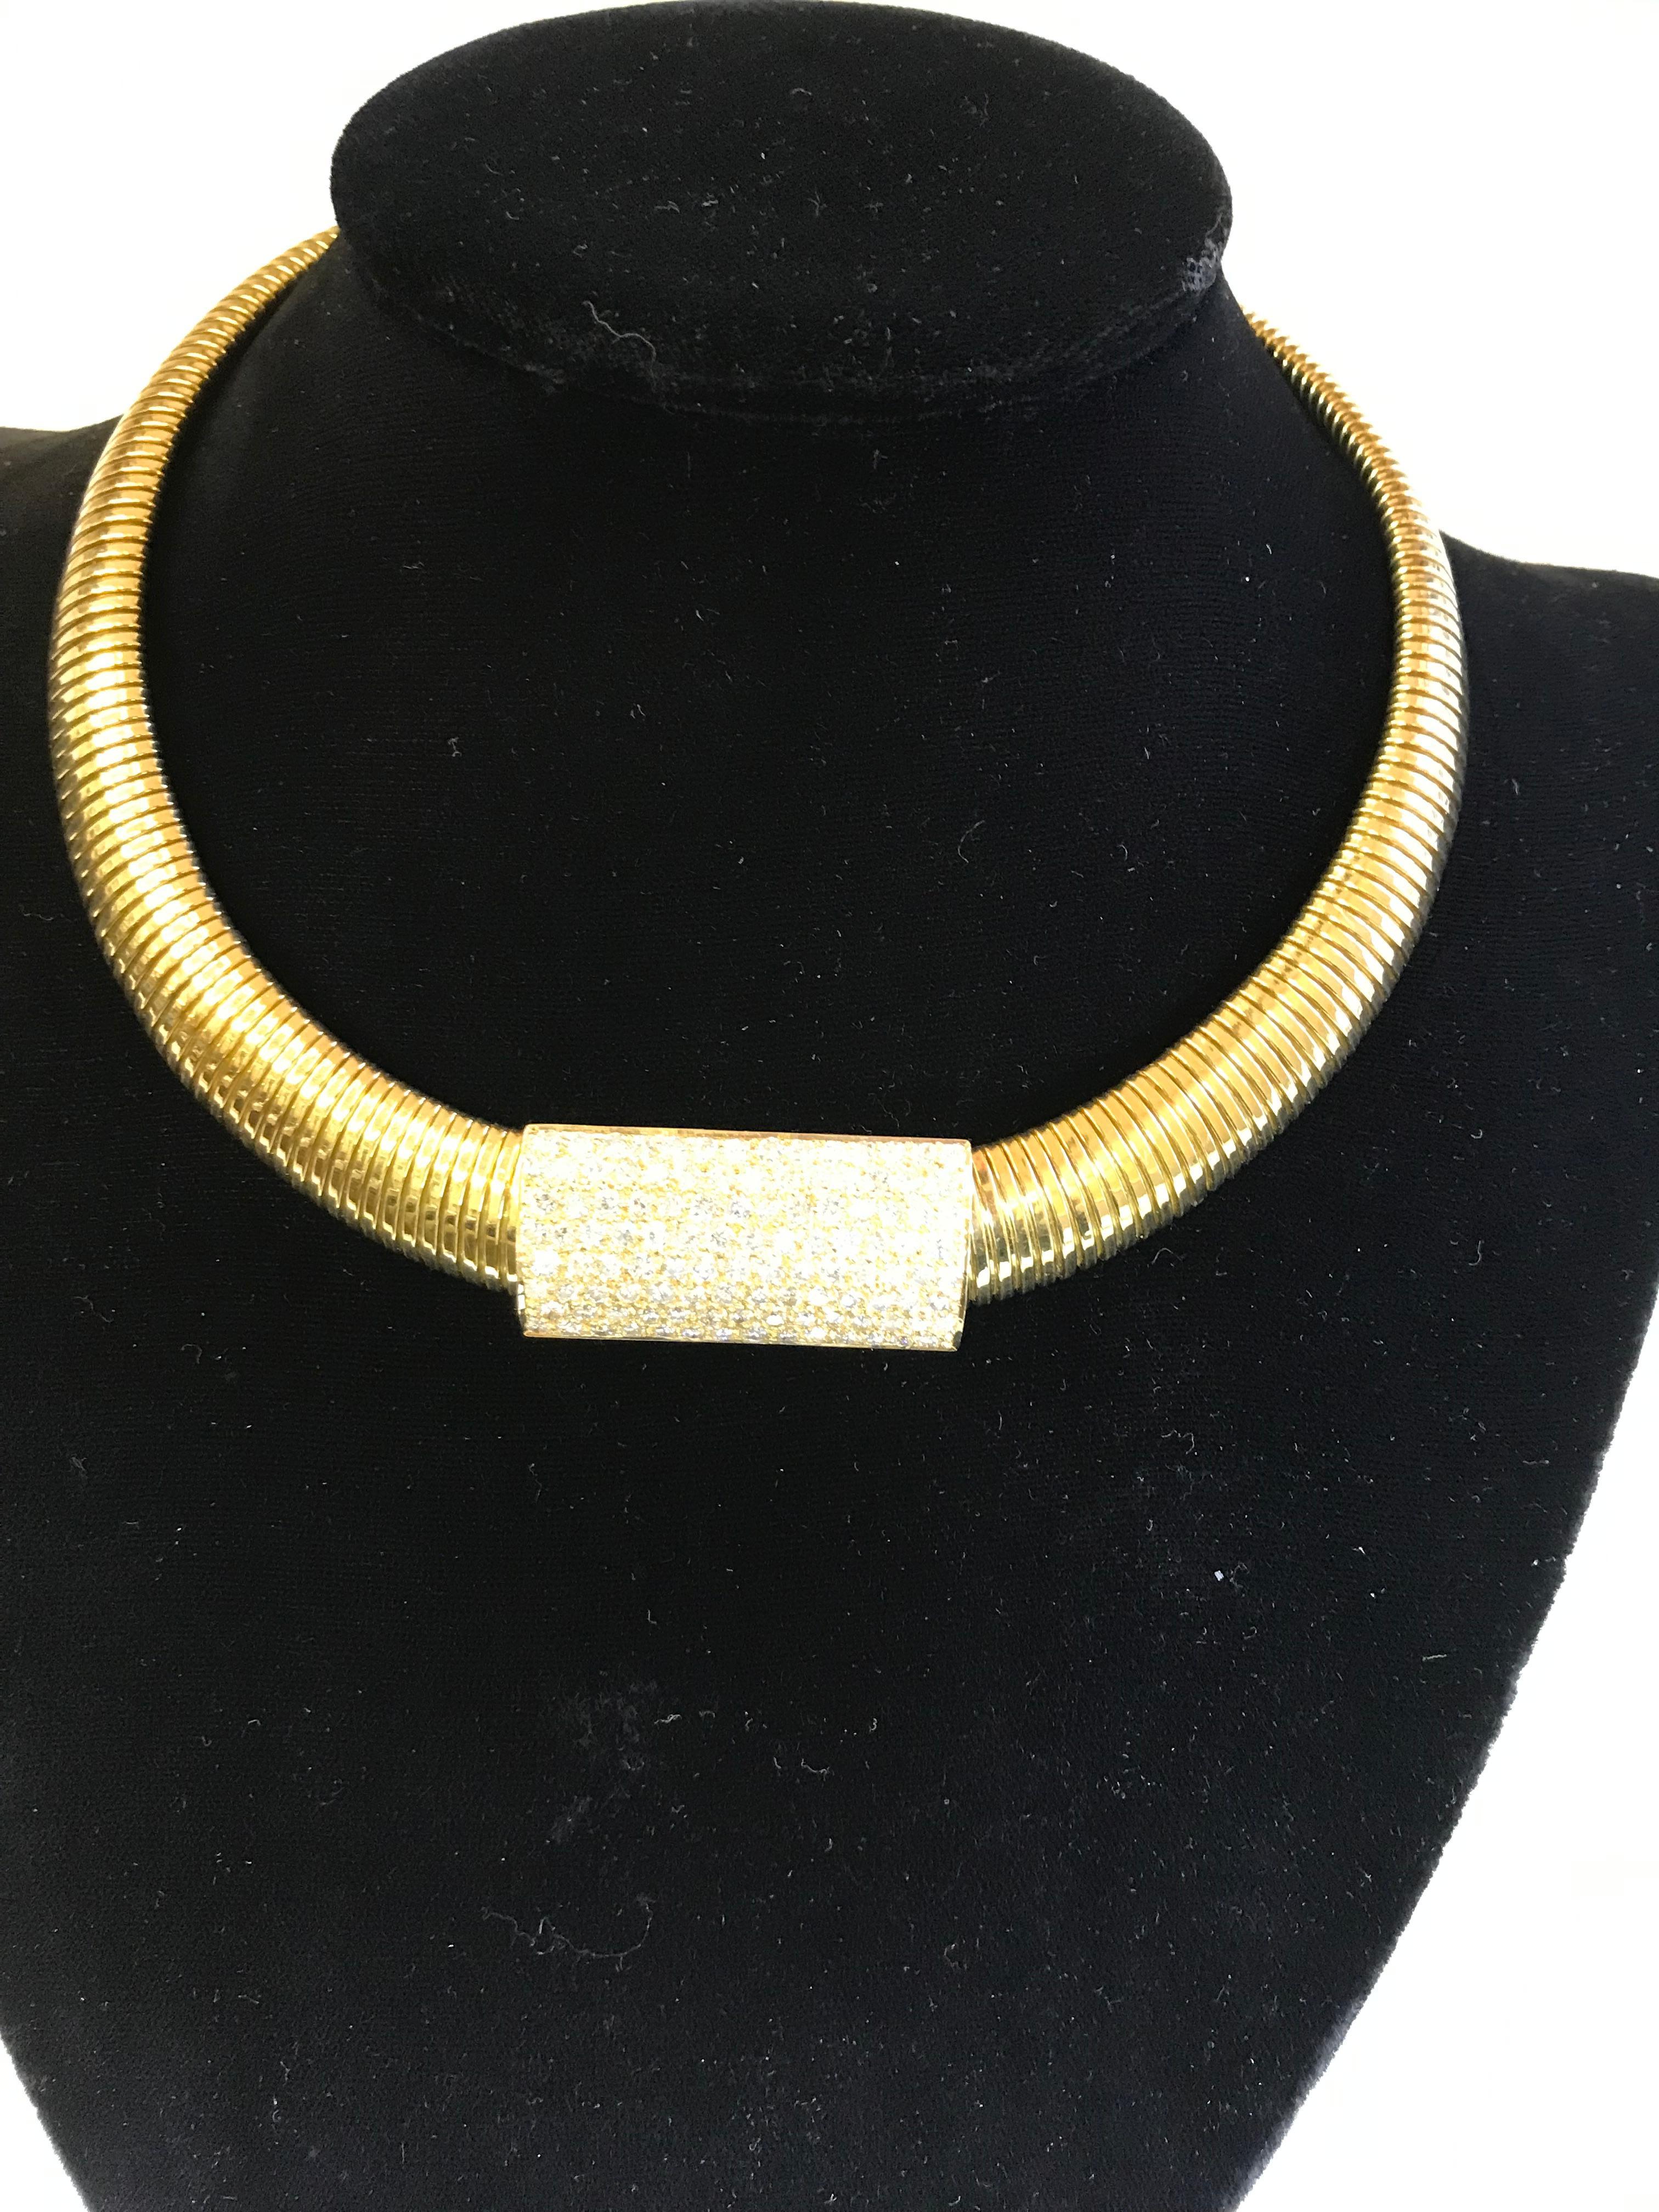 This gorgeous piece is sure to get you noticed! Dress it up or wear it casual, the diamond pendant is removable giving you two looks!
18K yellow gold Gooseneck Necklace 
Approximately 3/4 inches wide, graduating to approximately 6/8 inch wide
Rests